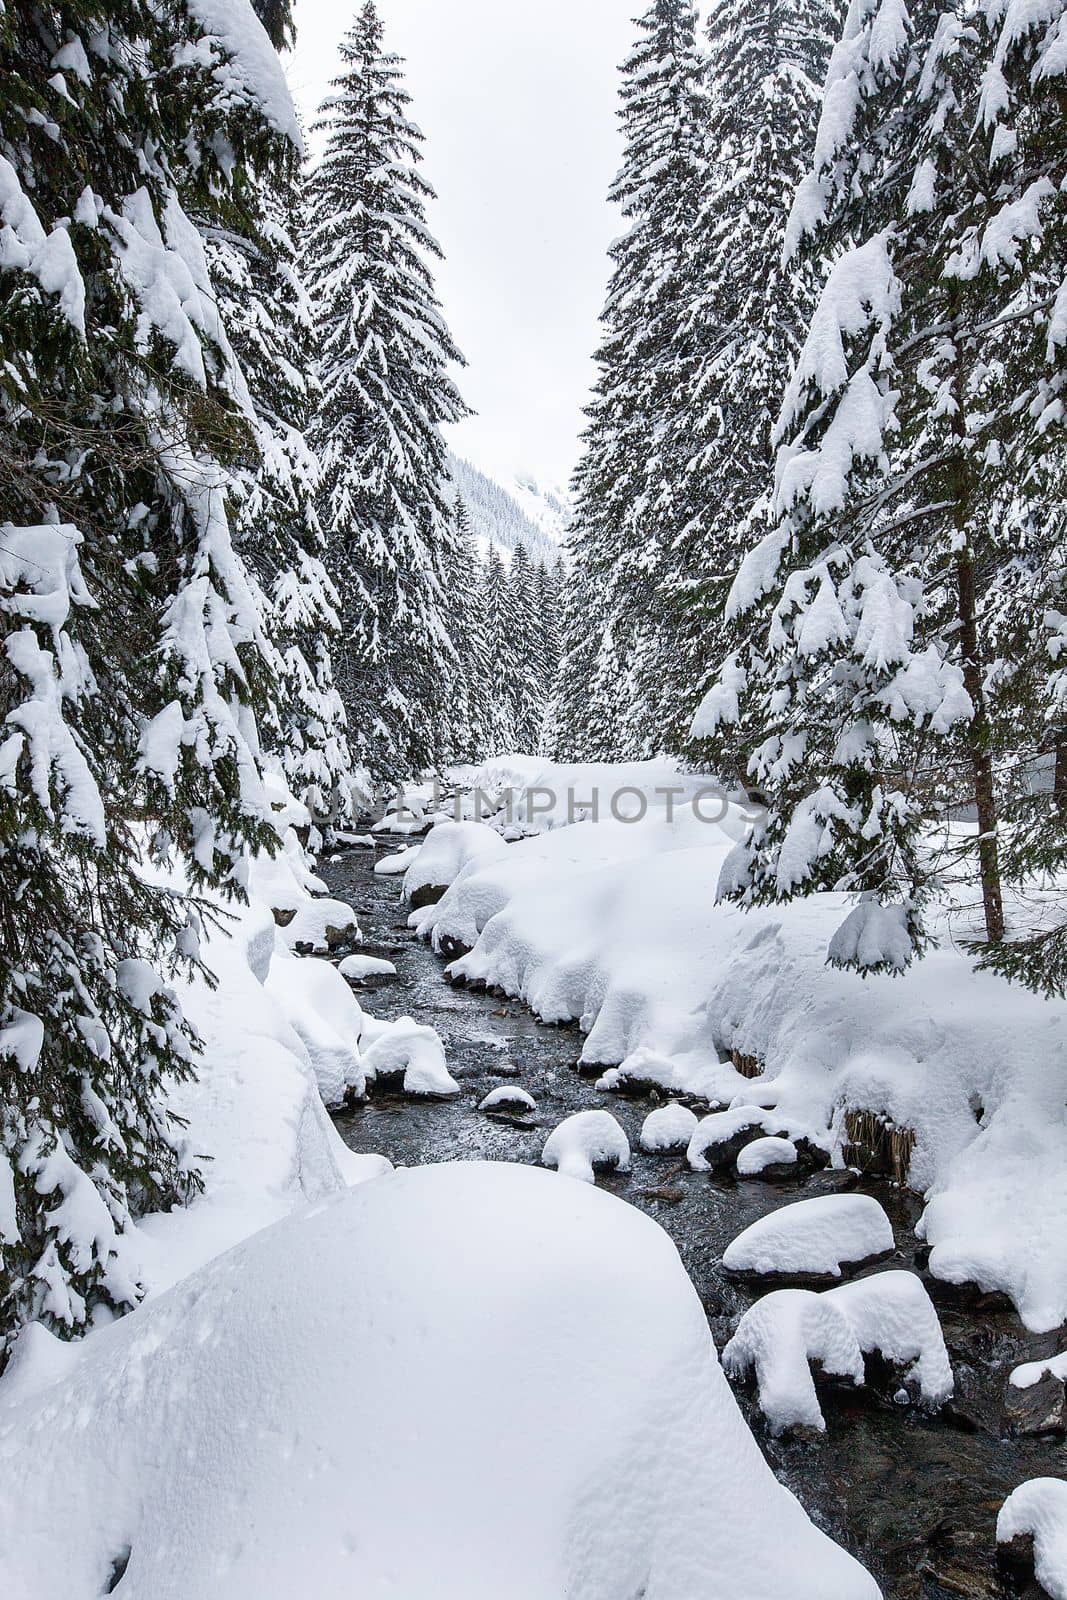 Turbulent river rapids in pictoresque forest during winter. Magical Landscape